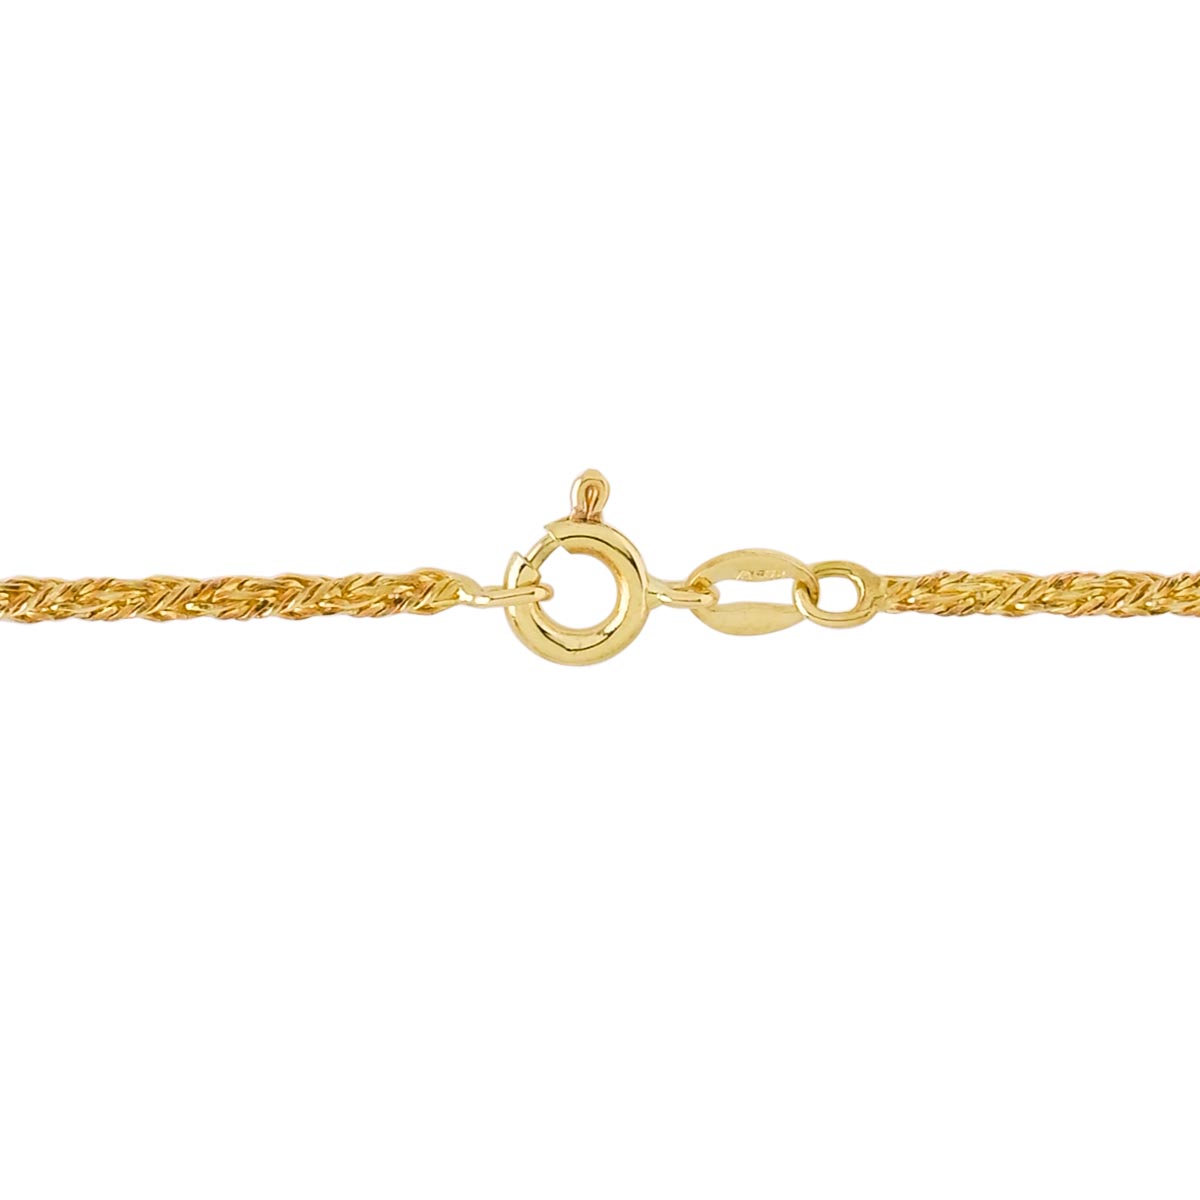 Estate Braided Wheat Chain in 18kt Yellow Gold (20 inches and 1.9mm wide)